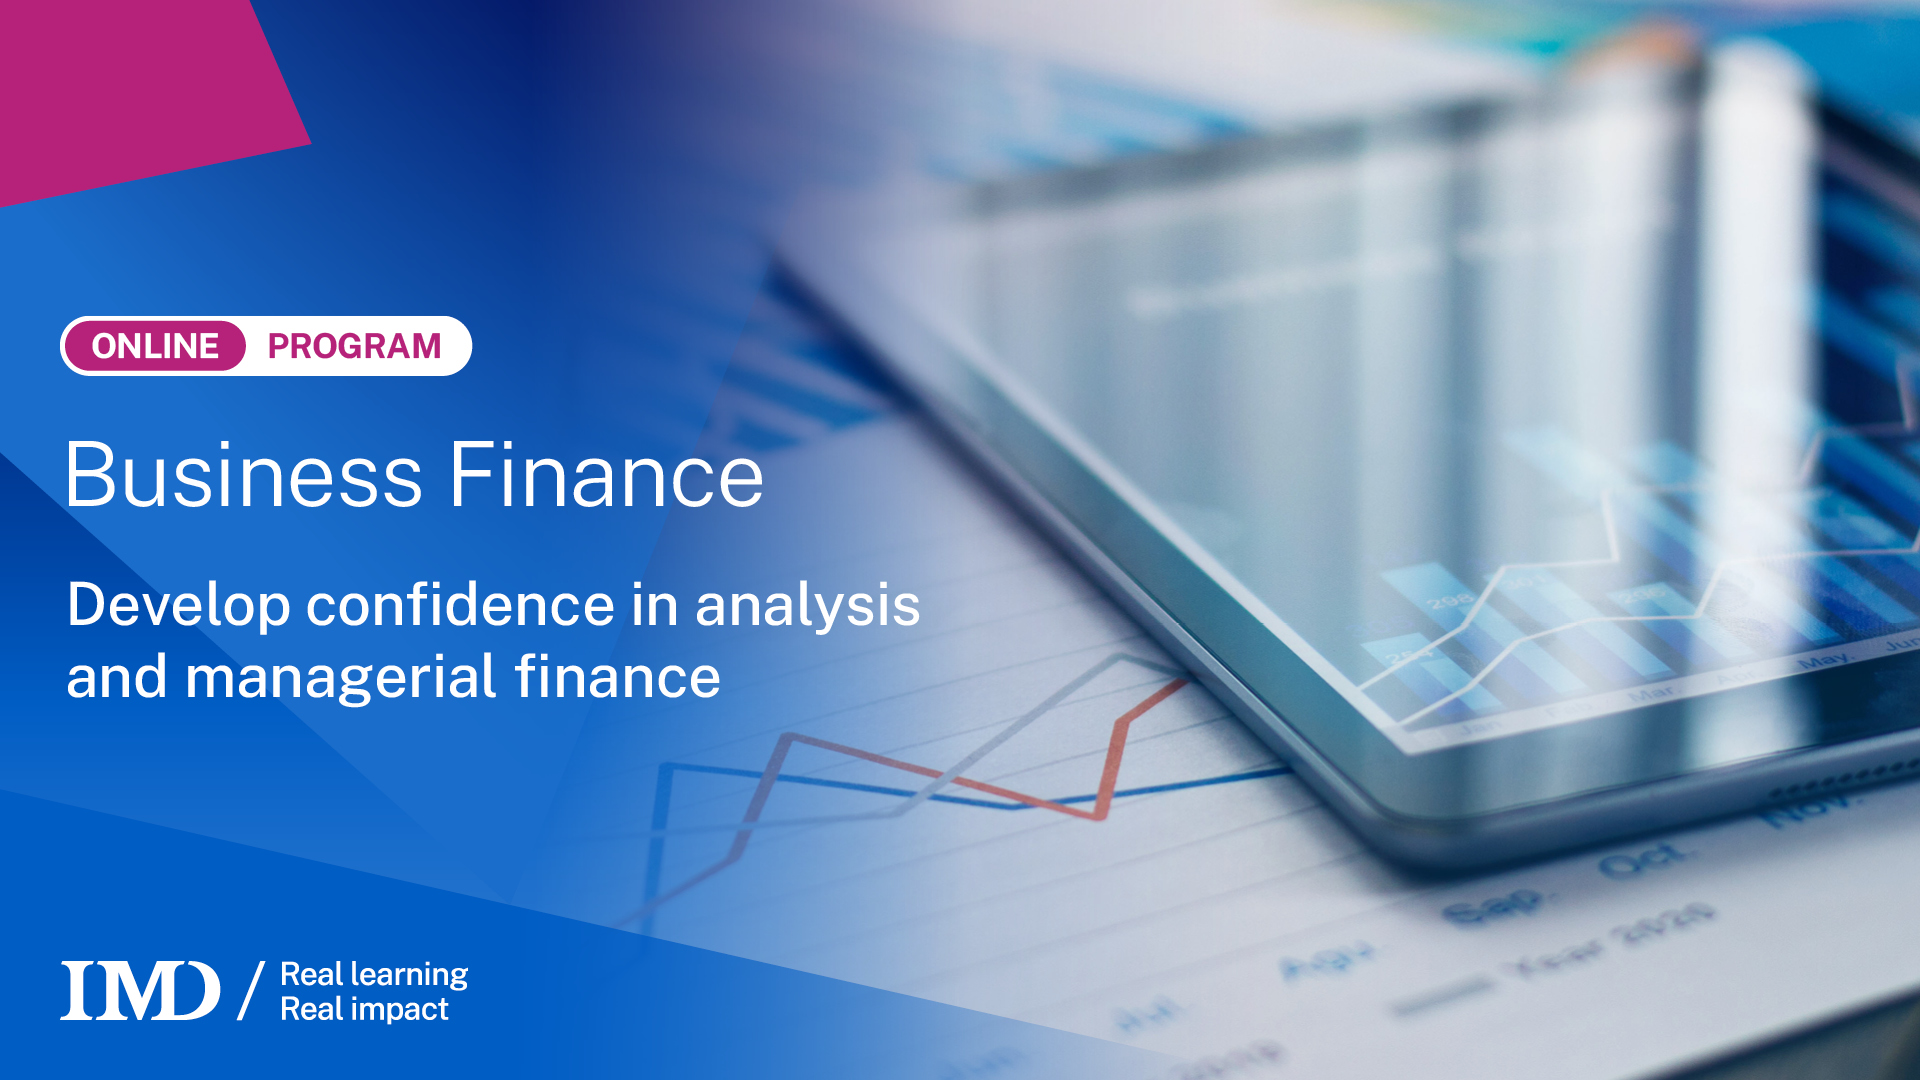 Business Finance Online Course - Become confident in finance